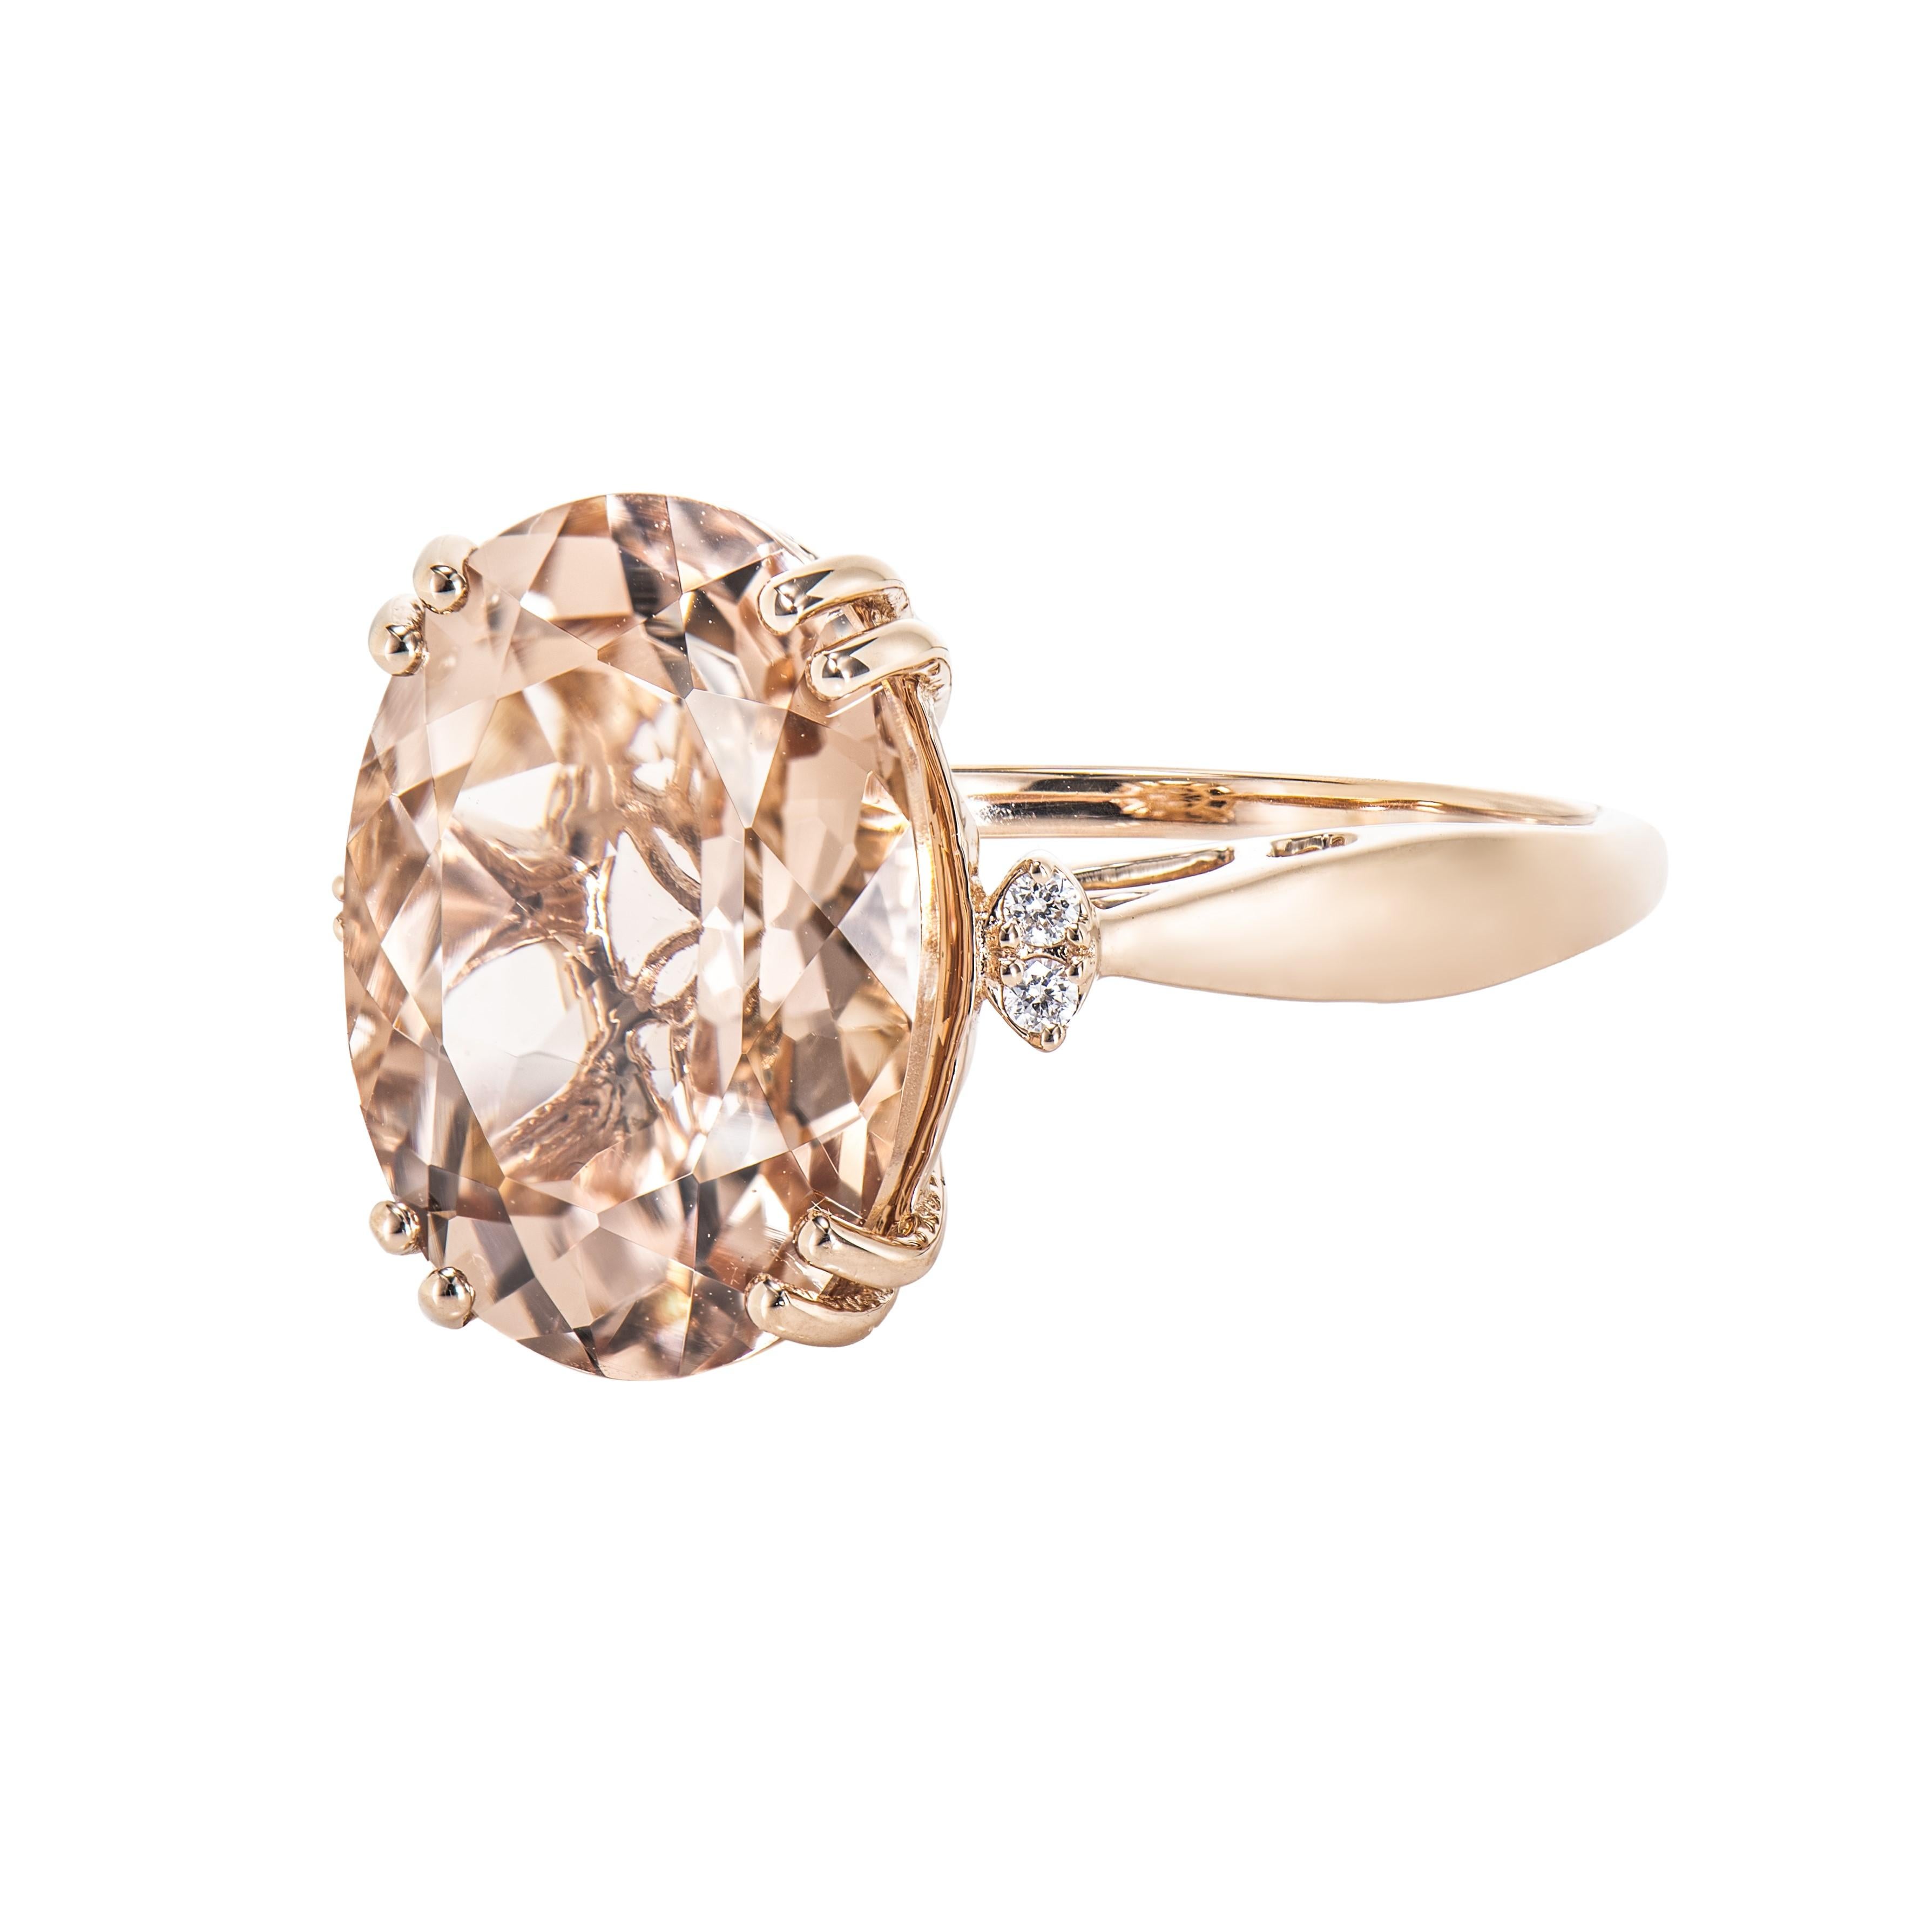 Oval Cut 6.12 Carat Morganite Fancy Ring in 18Karat Rose Gold with White Diamond.   For Sale